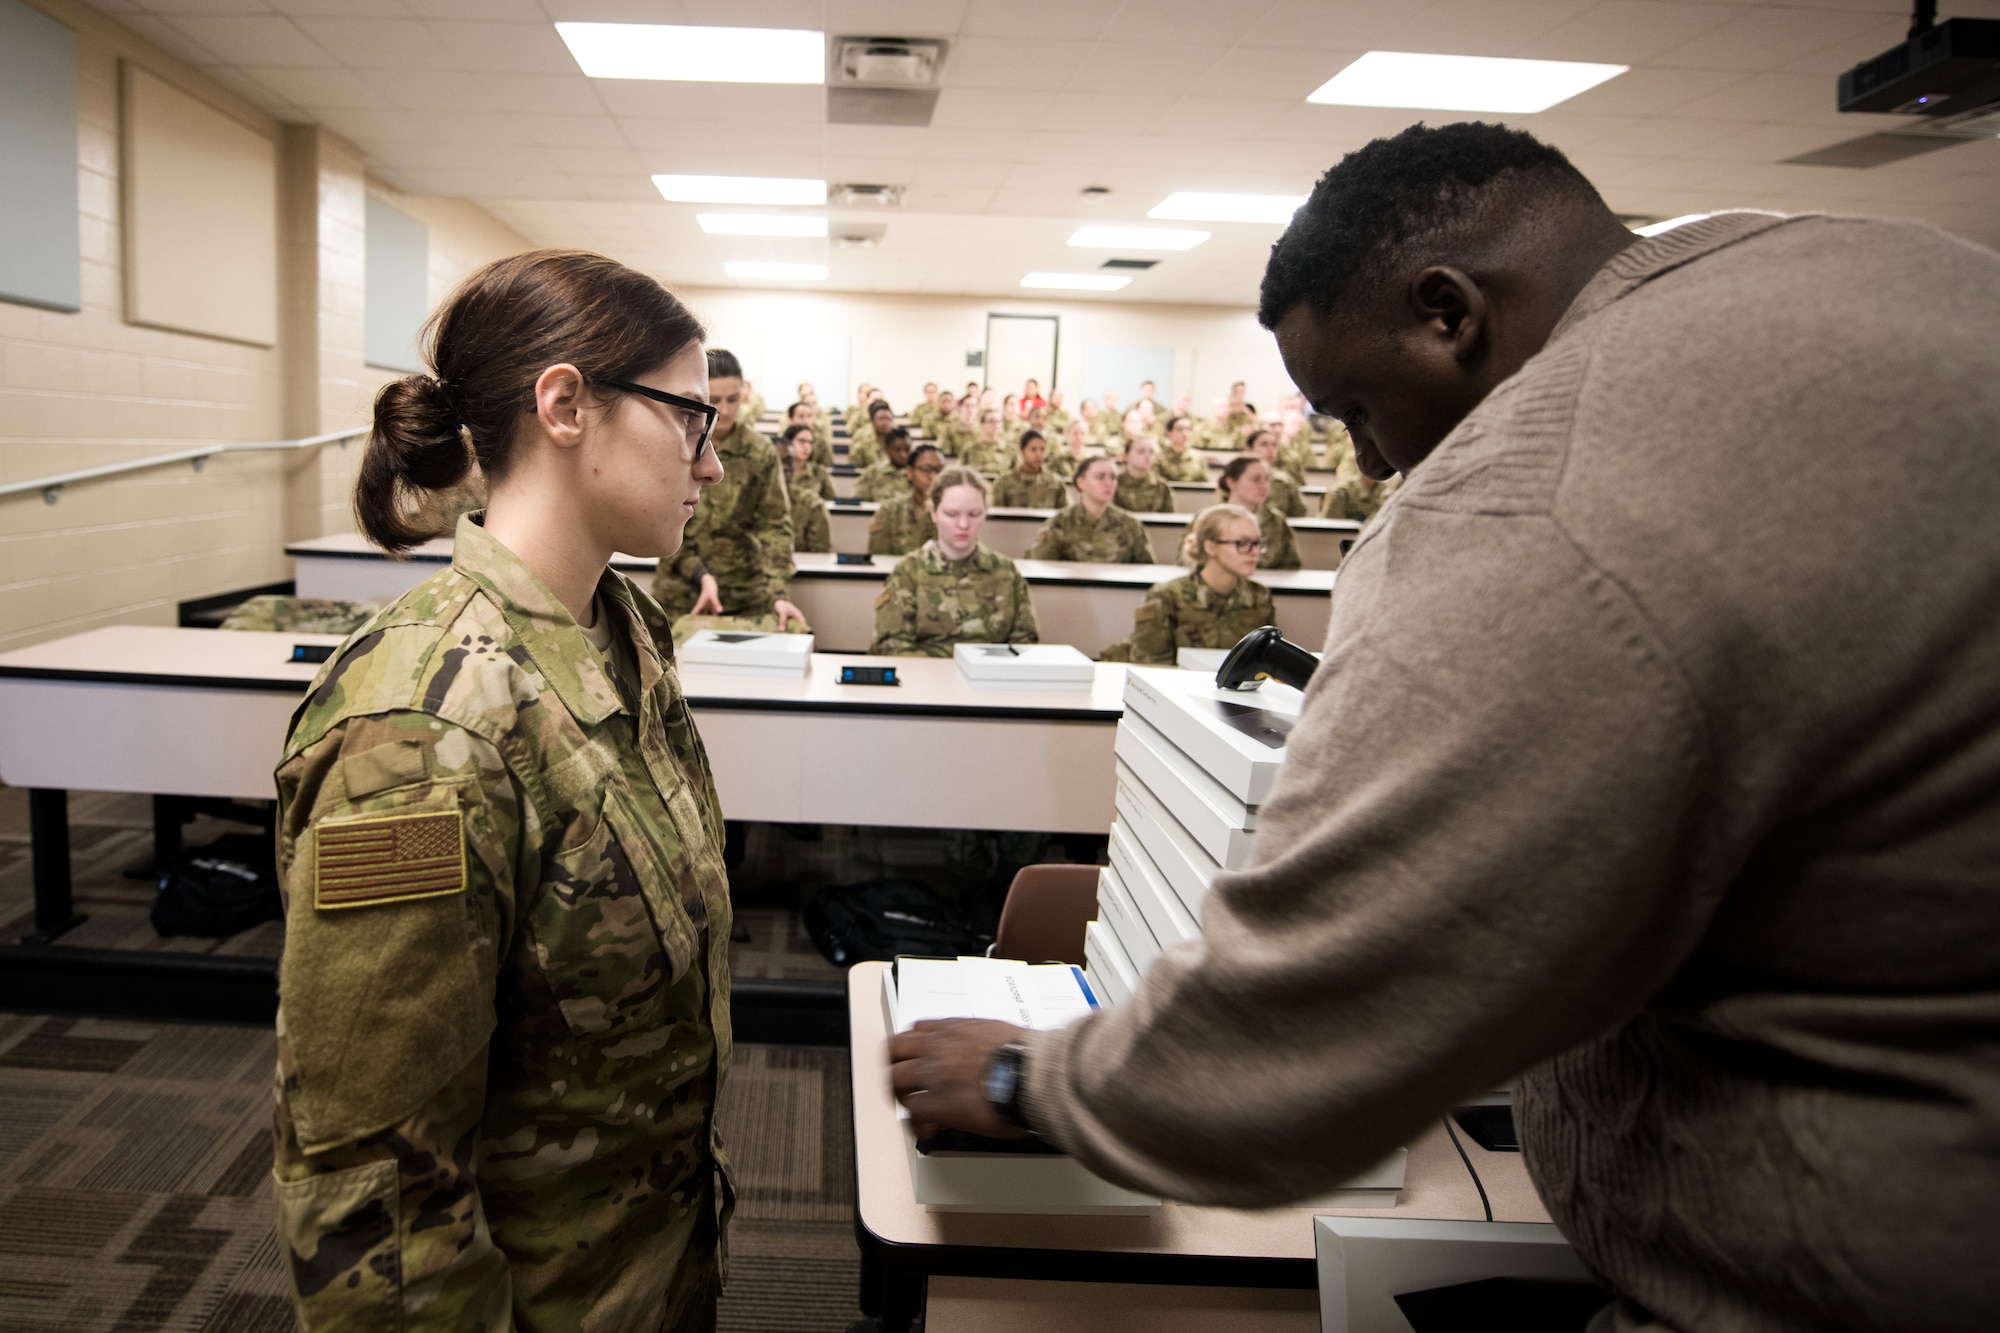 U.S. Air Force basic military training trainees are issued personal computers during in-processing as part of a pilot test under a Cooperative Research and Development Agreement partnership at Joint Base San Antonio-Lackland, Texas, Dec. 11, 2019. The computers replace all hard copy textbooks BMT trainees currently use with the intent to help BMT assess learning outcomes, value and return on investment. (U.S. Air Force photo by Sarayuth Pinthong)